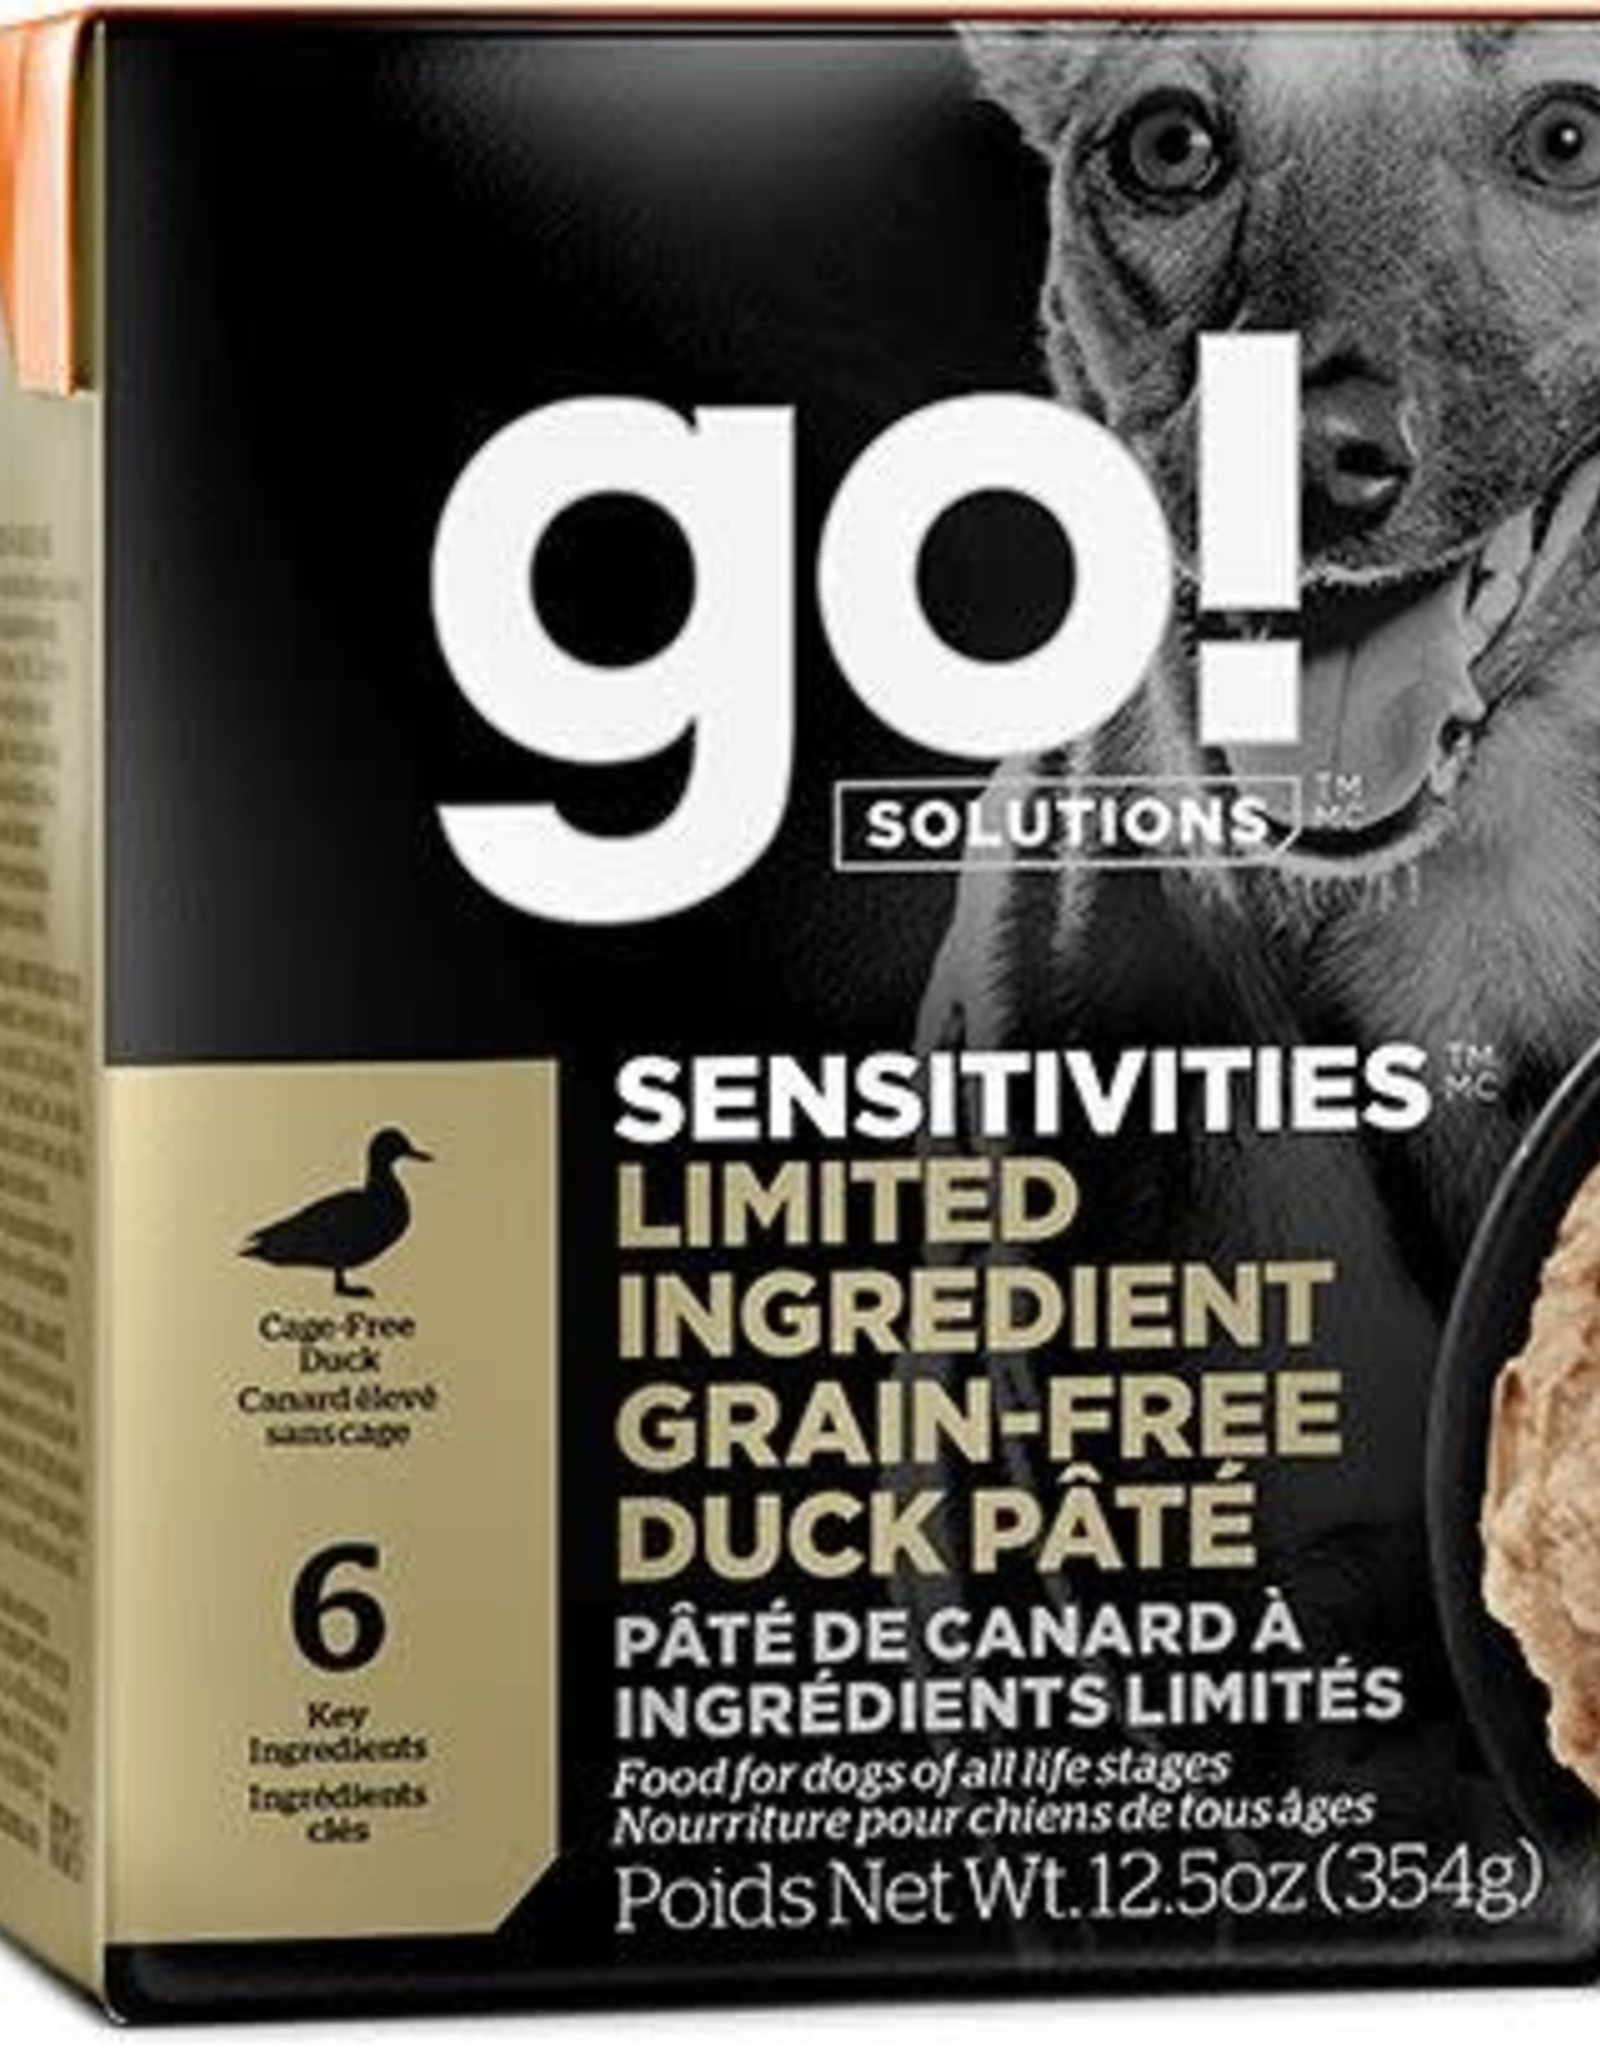 GO GO! Limited Ingredient Tetra Pack Grain Free Duck Dog Pate 12.5 oz